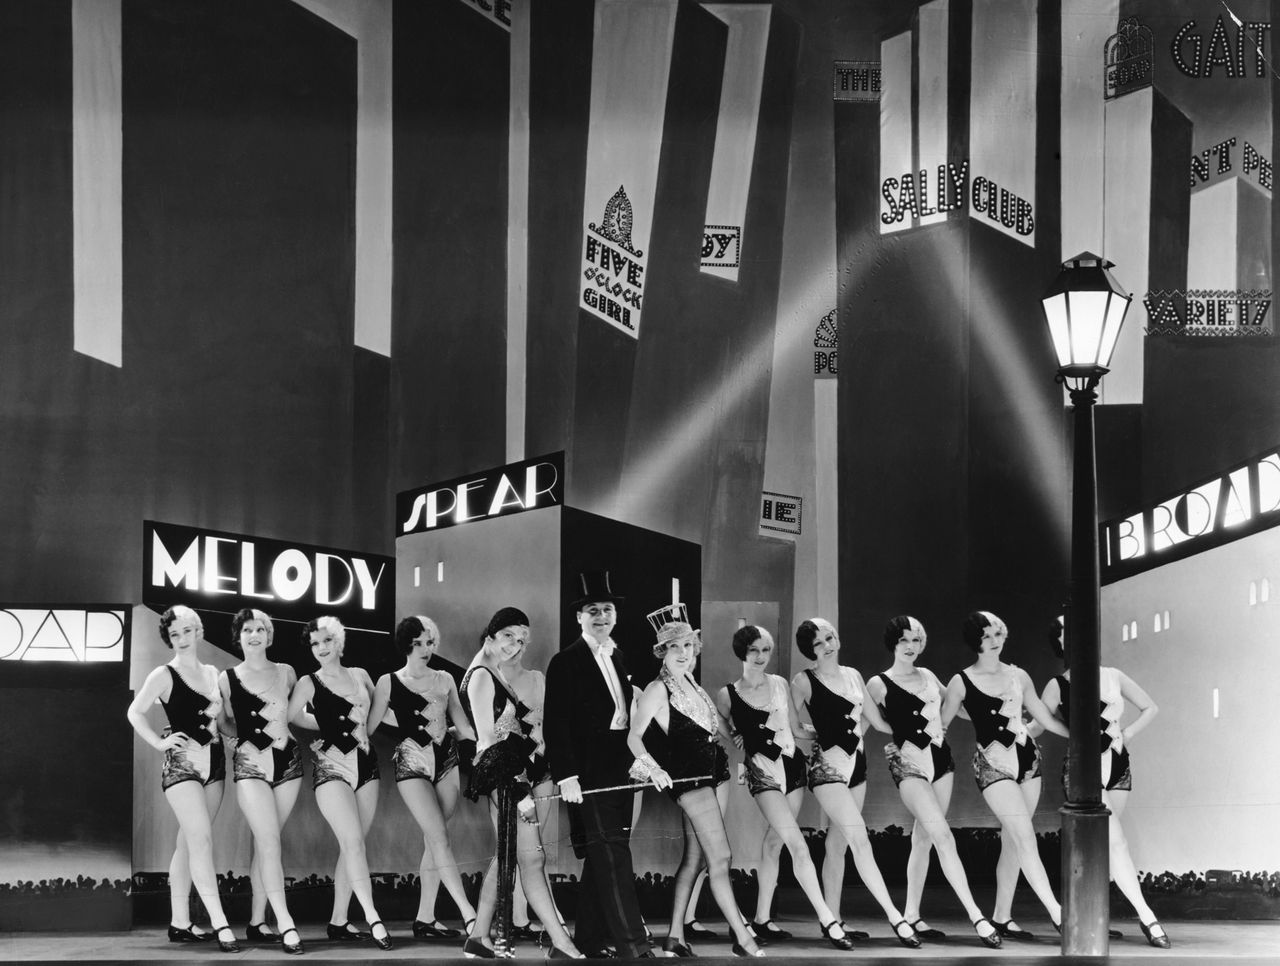 Charles King and Anita Page, stars of the film, stand with dancers in front of a Manhattan backdrop.